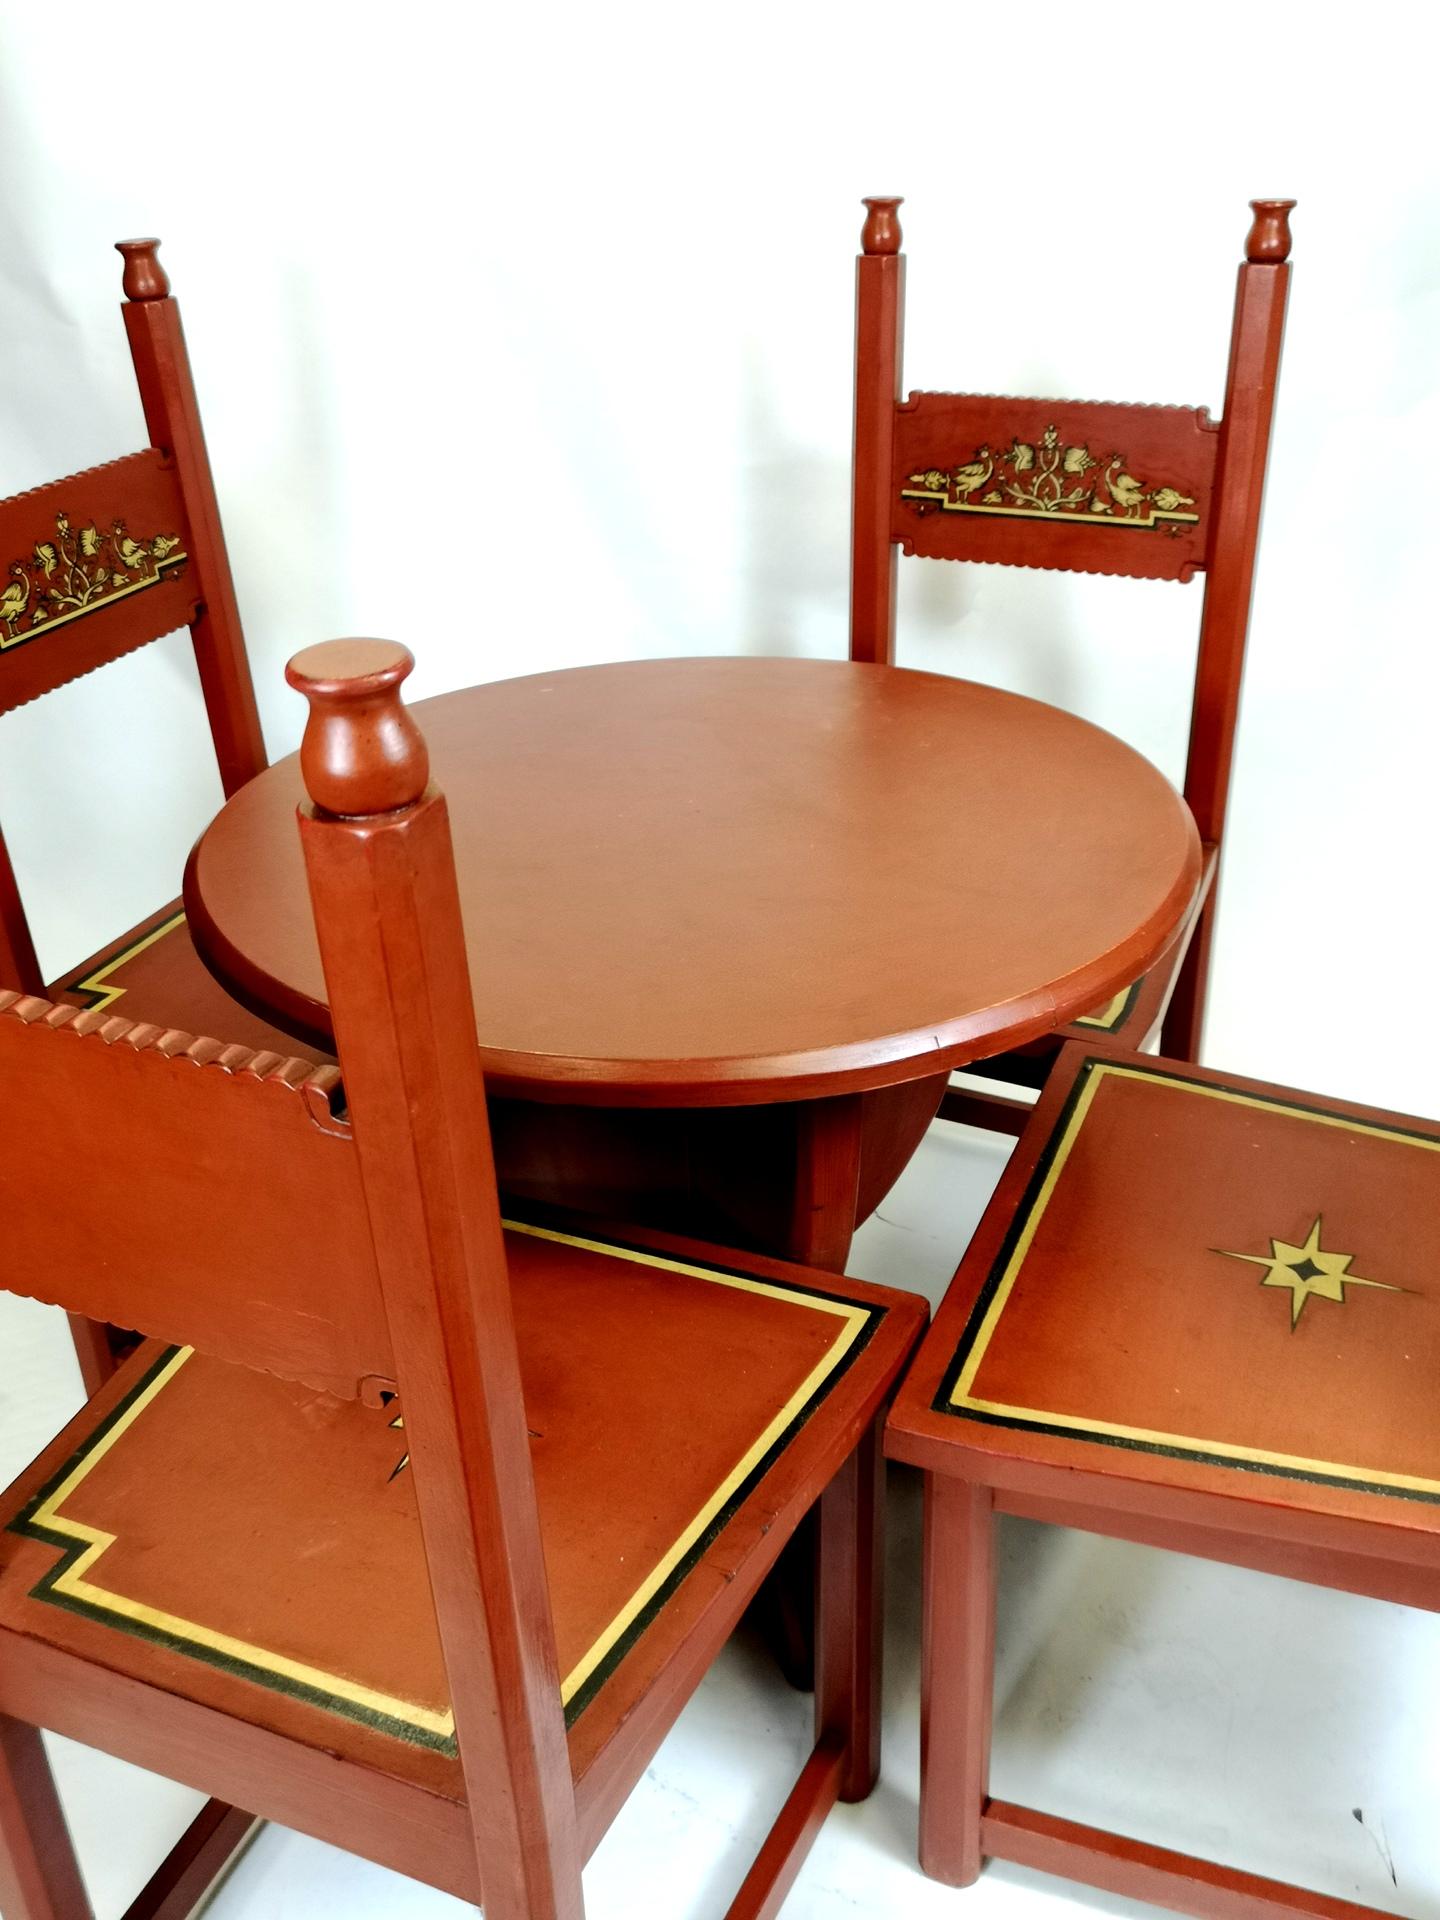 1930s dining table and chairs